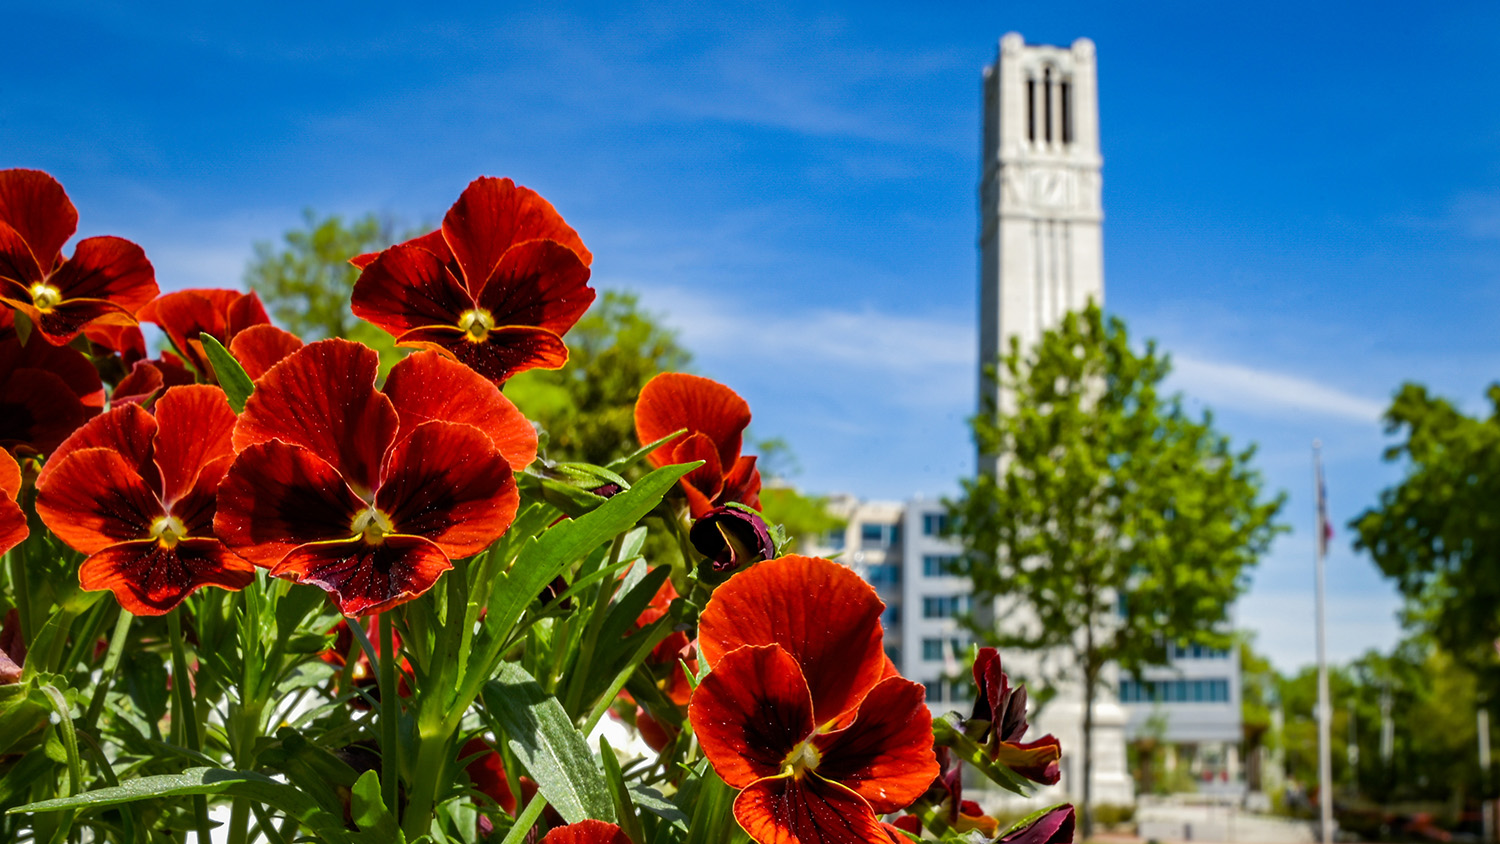 Spring blooms around the Memorial Belltower on an April afternoon